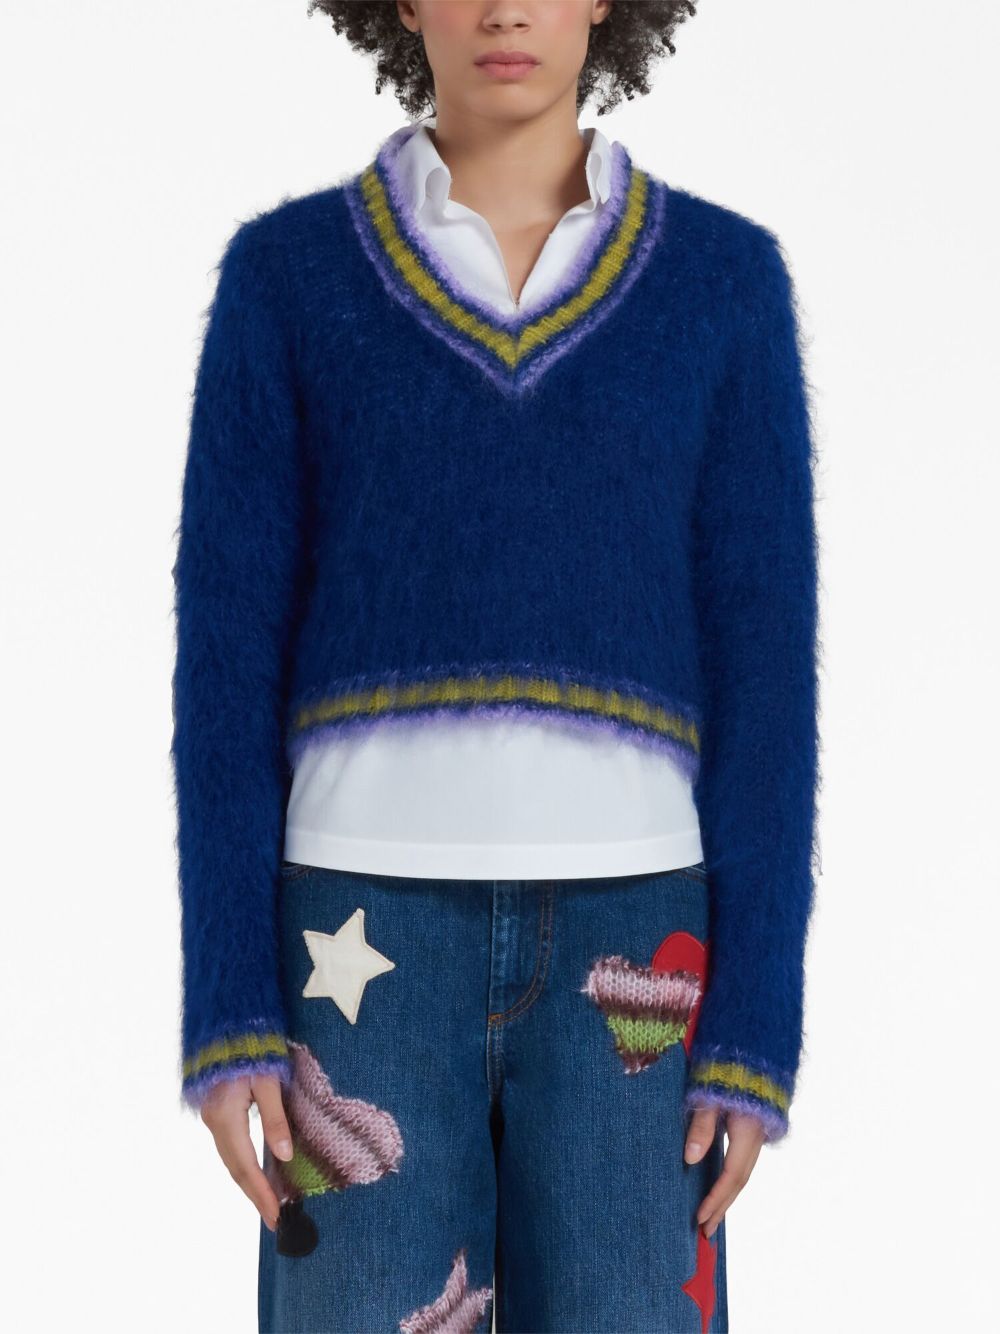 Bicolor Knitted Pullover for Women in Royal by MARNI